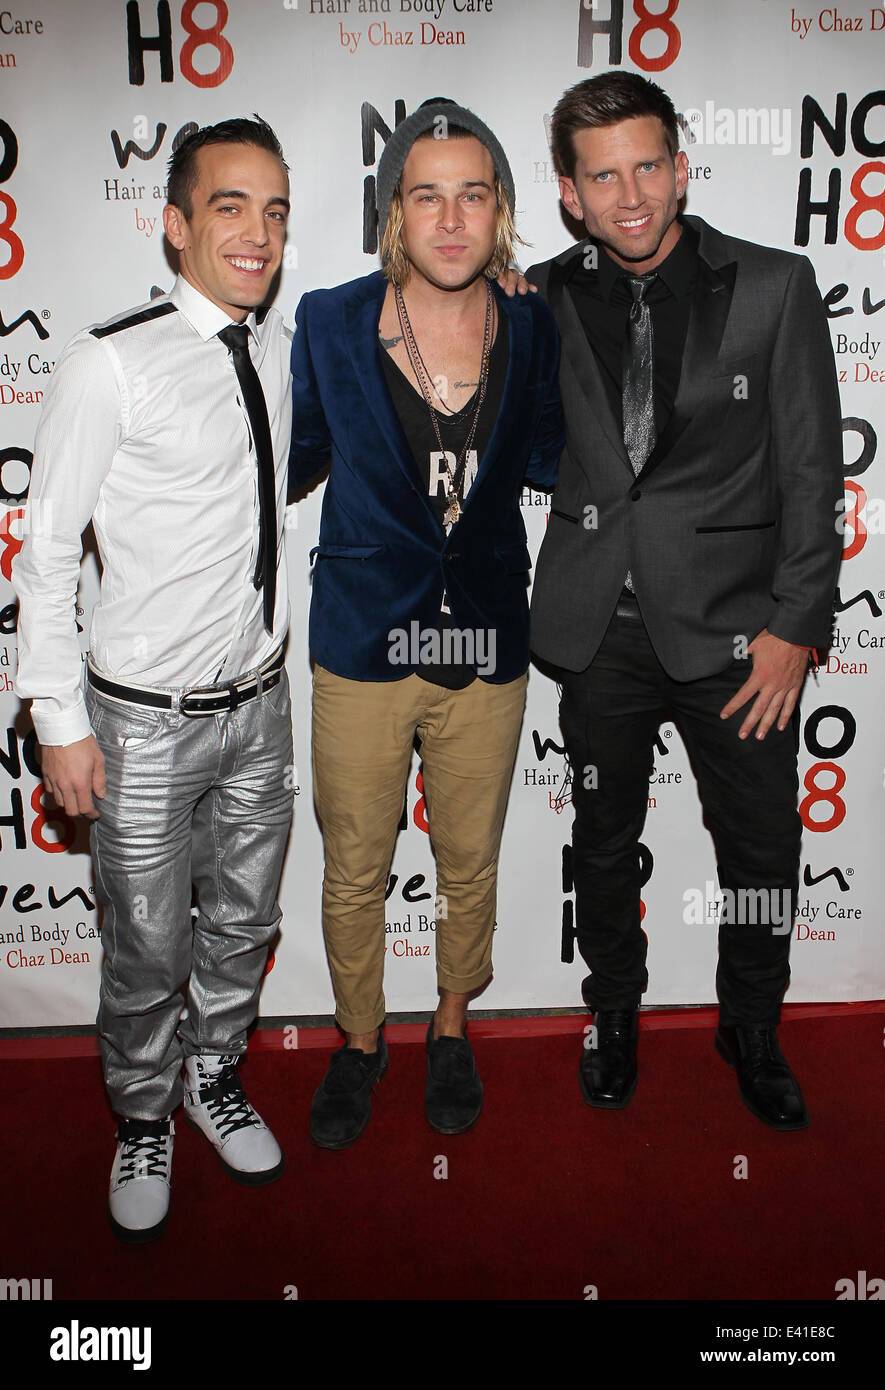 NOH8 Campaign's 5th Annual Anniversary Celebration At Avalon  Featuring: Adam Bouska,Ryan Cabrera,Jeff Parshley Where: Hollywood, California, United States When: 15 Dec 2013 Stock Photo